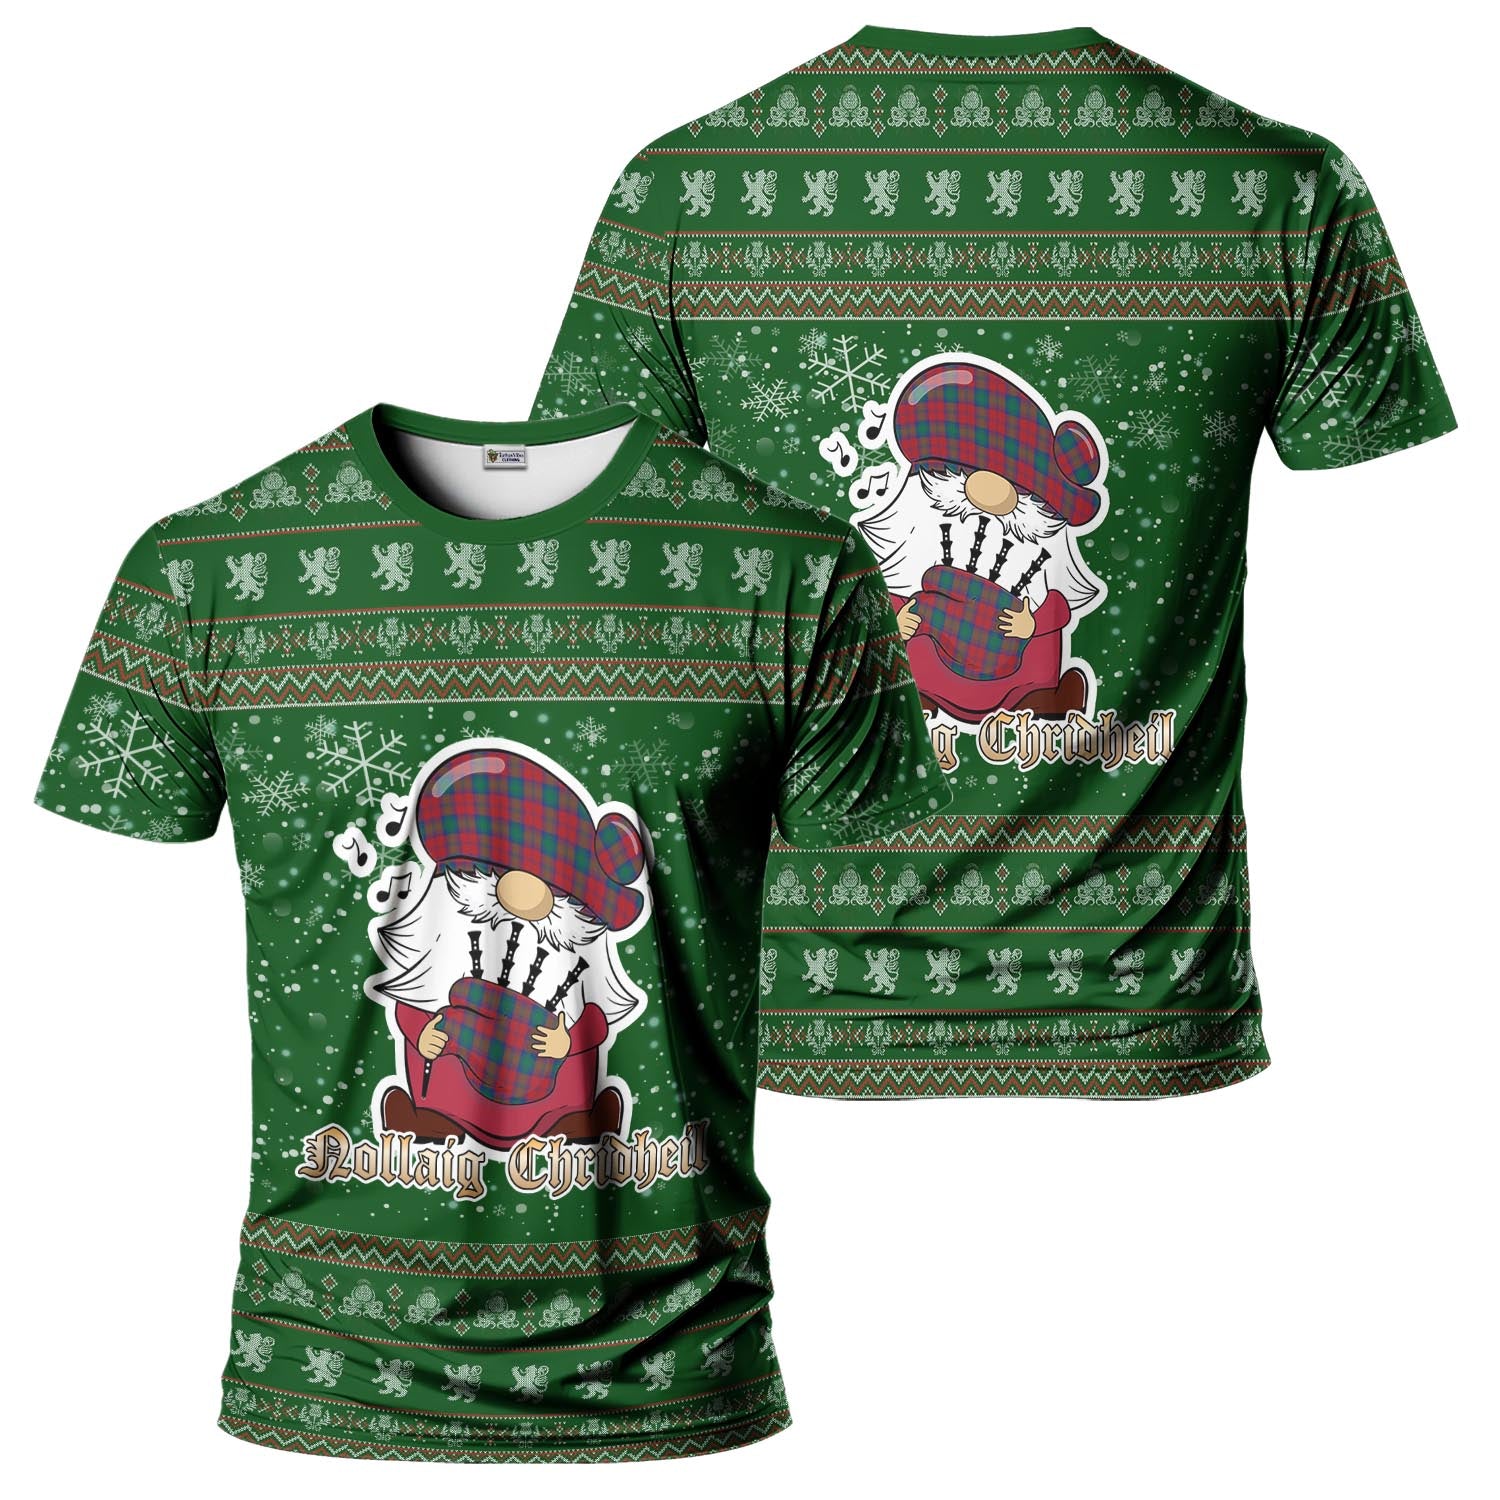 Lindsay Modern Clan Christmas Family T-Shirt with Funny Gnome Playing Bagpipes Men's Shirt Green - Tartanvibesclothing